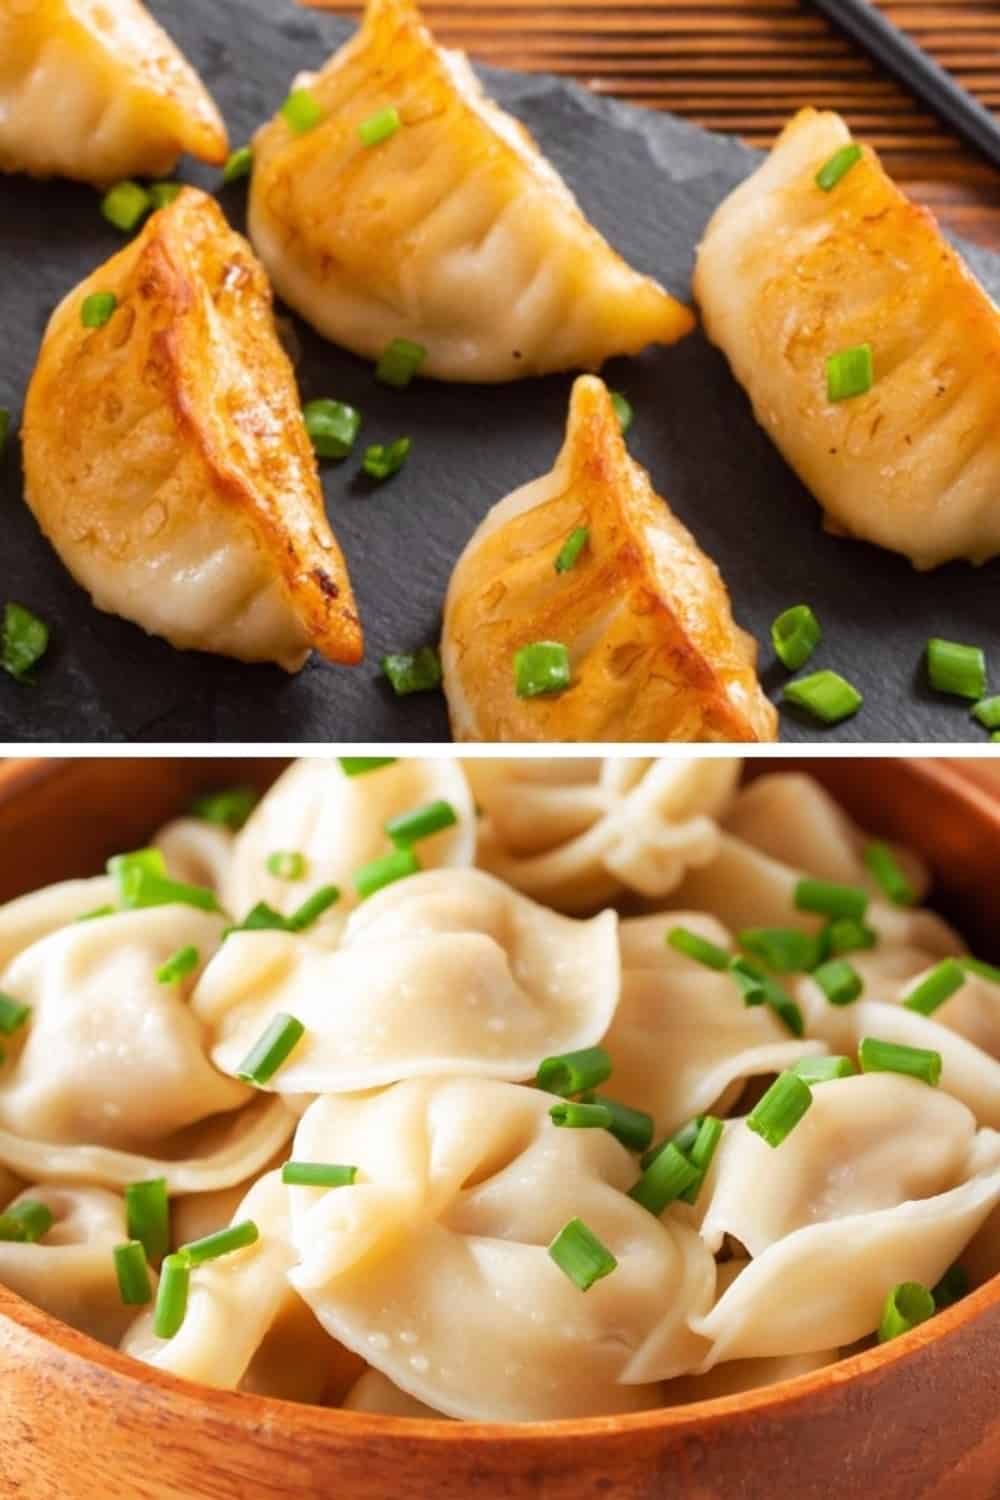 Differences Between Gyoza And Dumplings